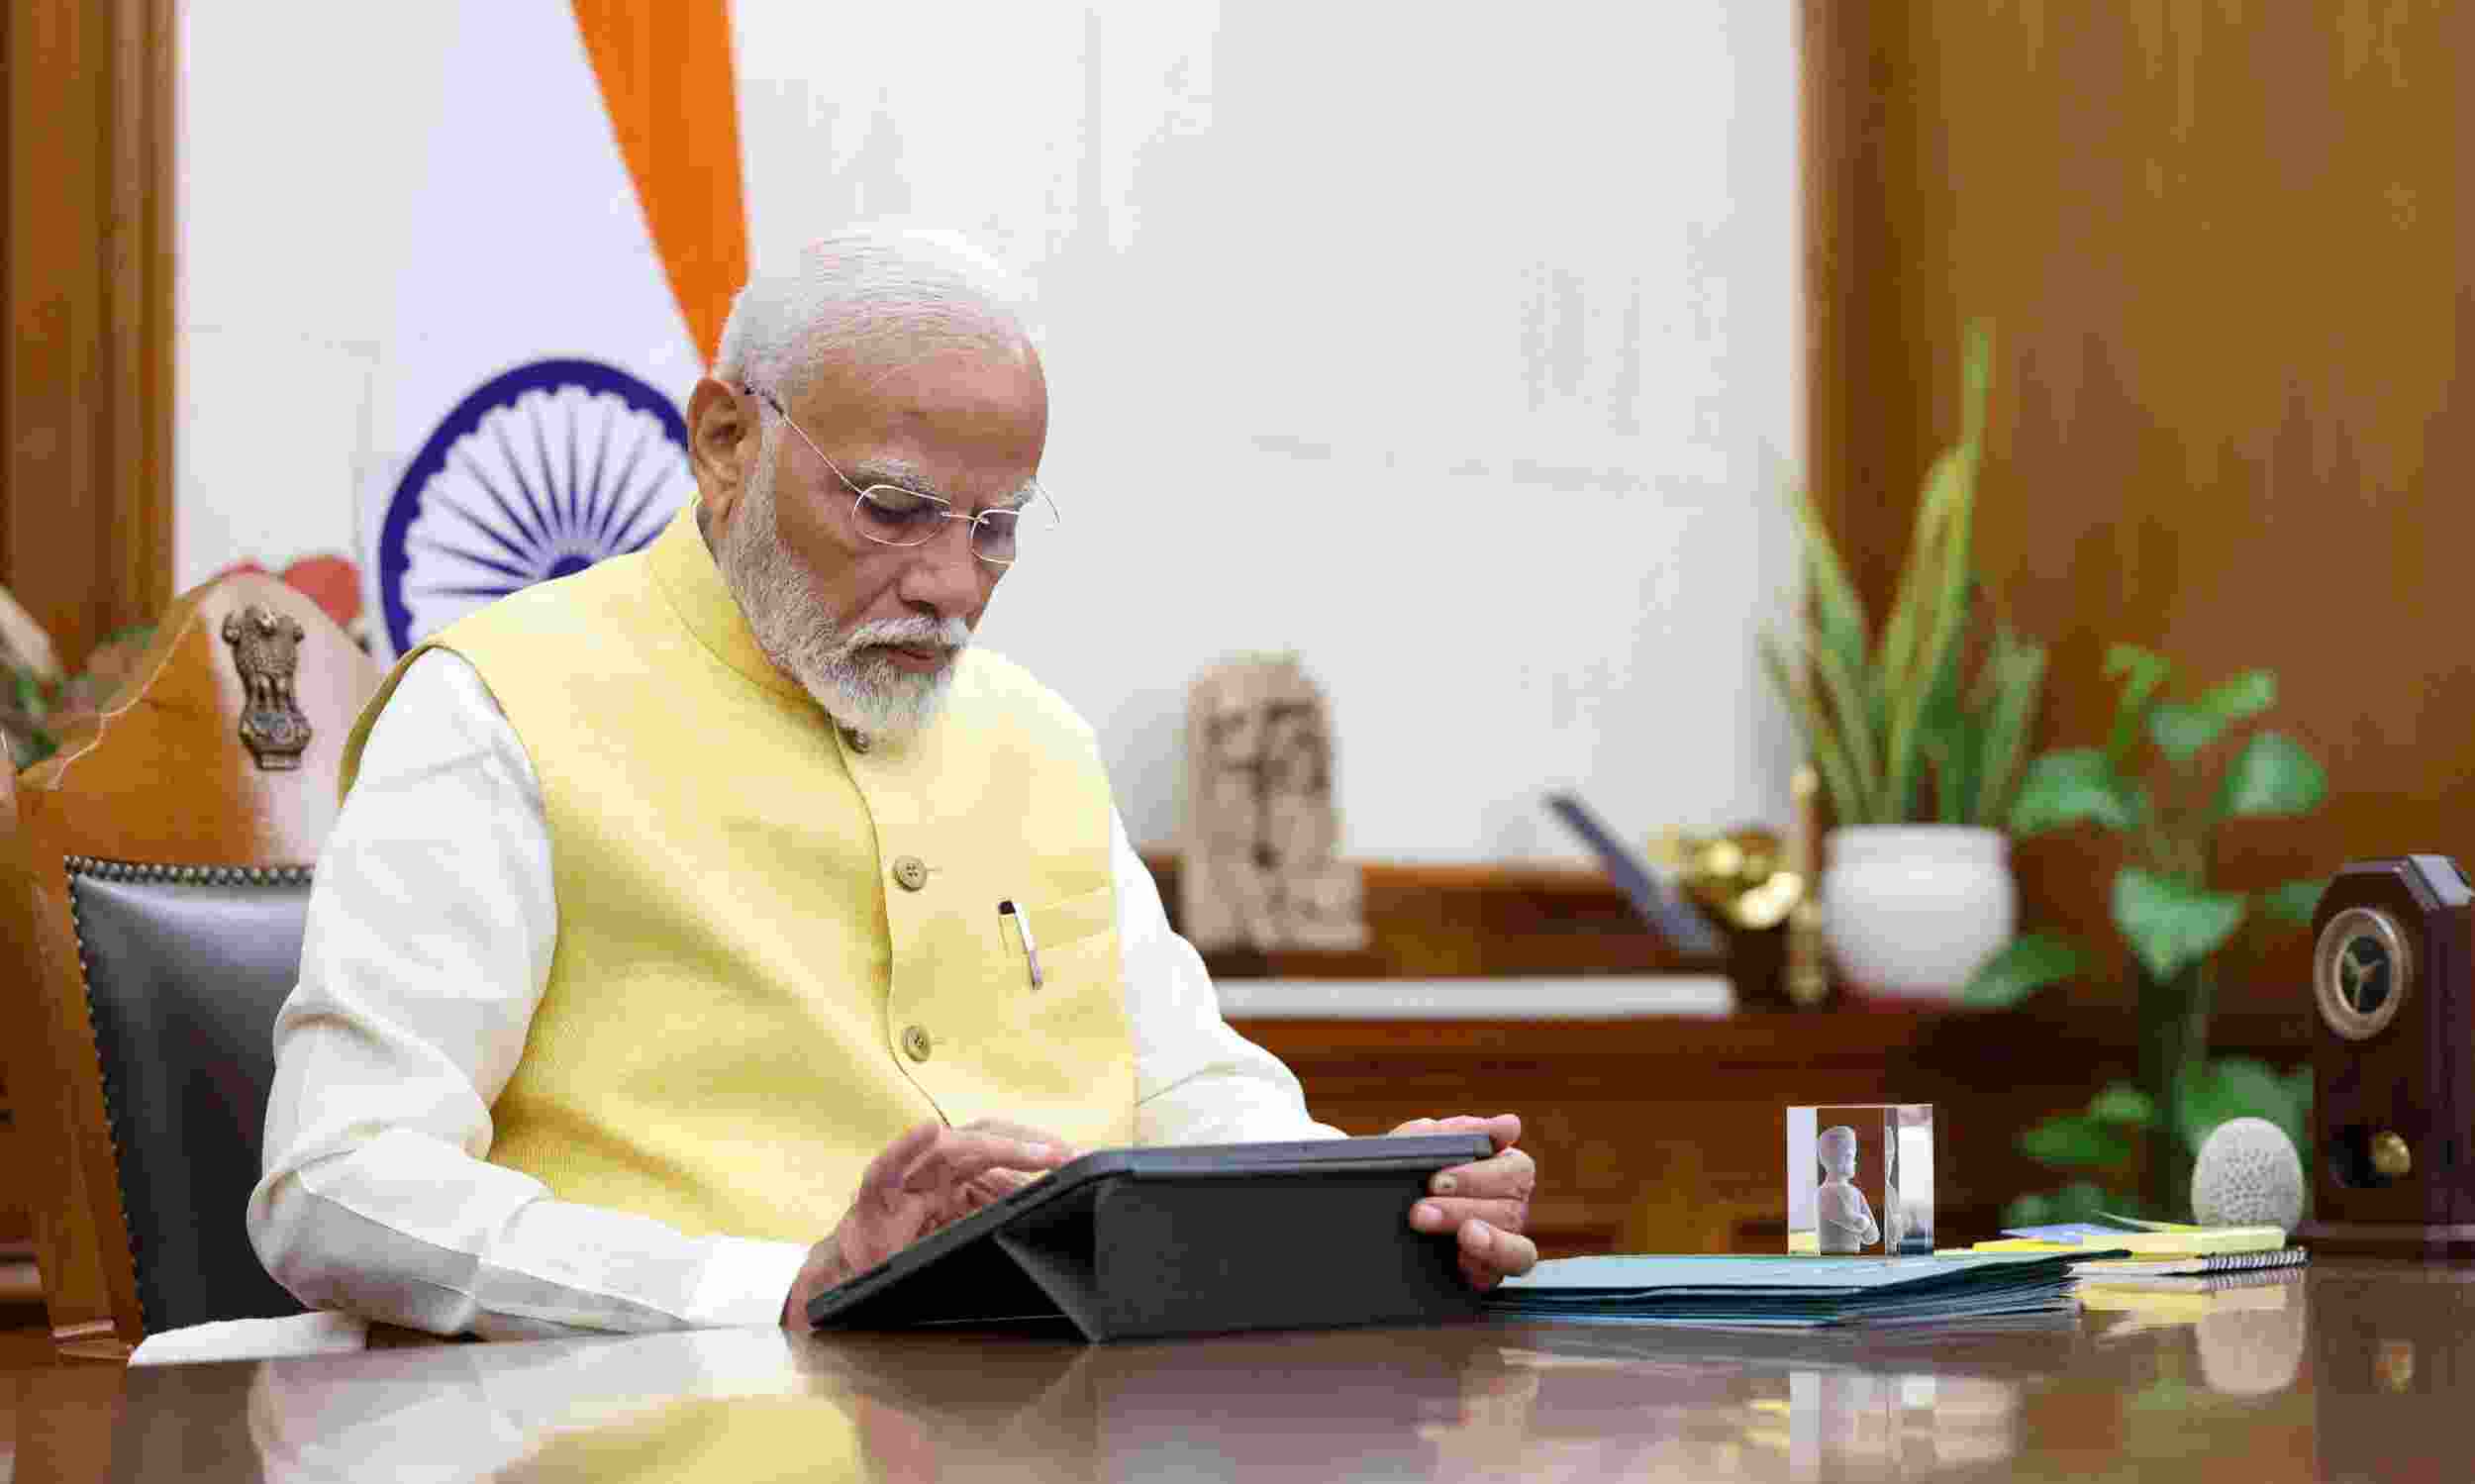 A day after taking the oath for a historic third term at Rashtrapati Bhavan, Prime Minister Narendra Modi assumed office on Monday and signed his first file related to the Kisan Samman Nidhi scheme.